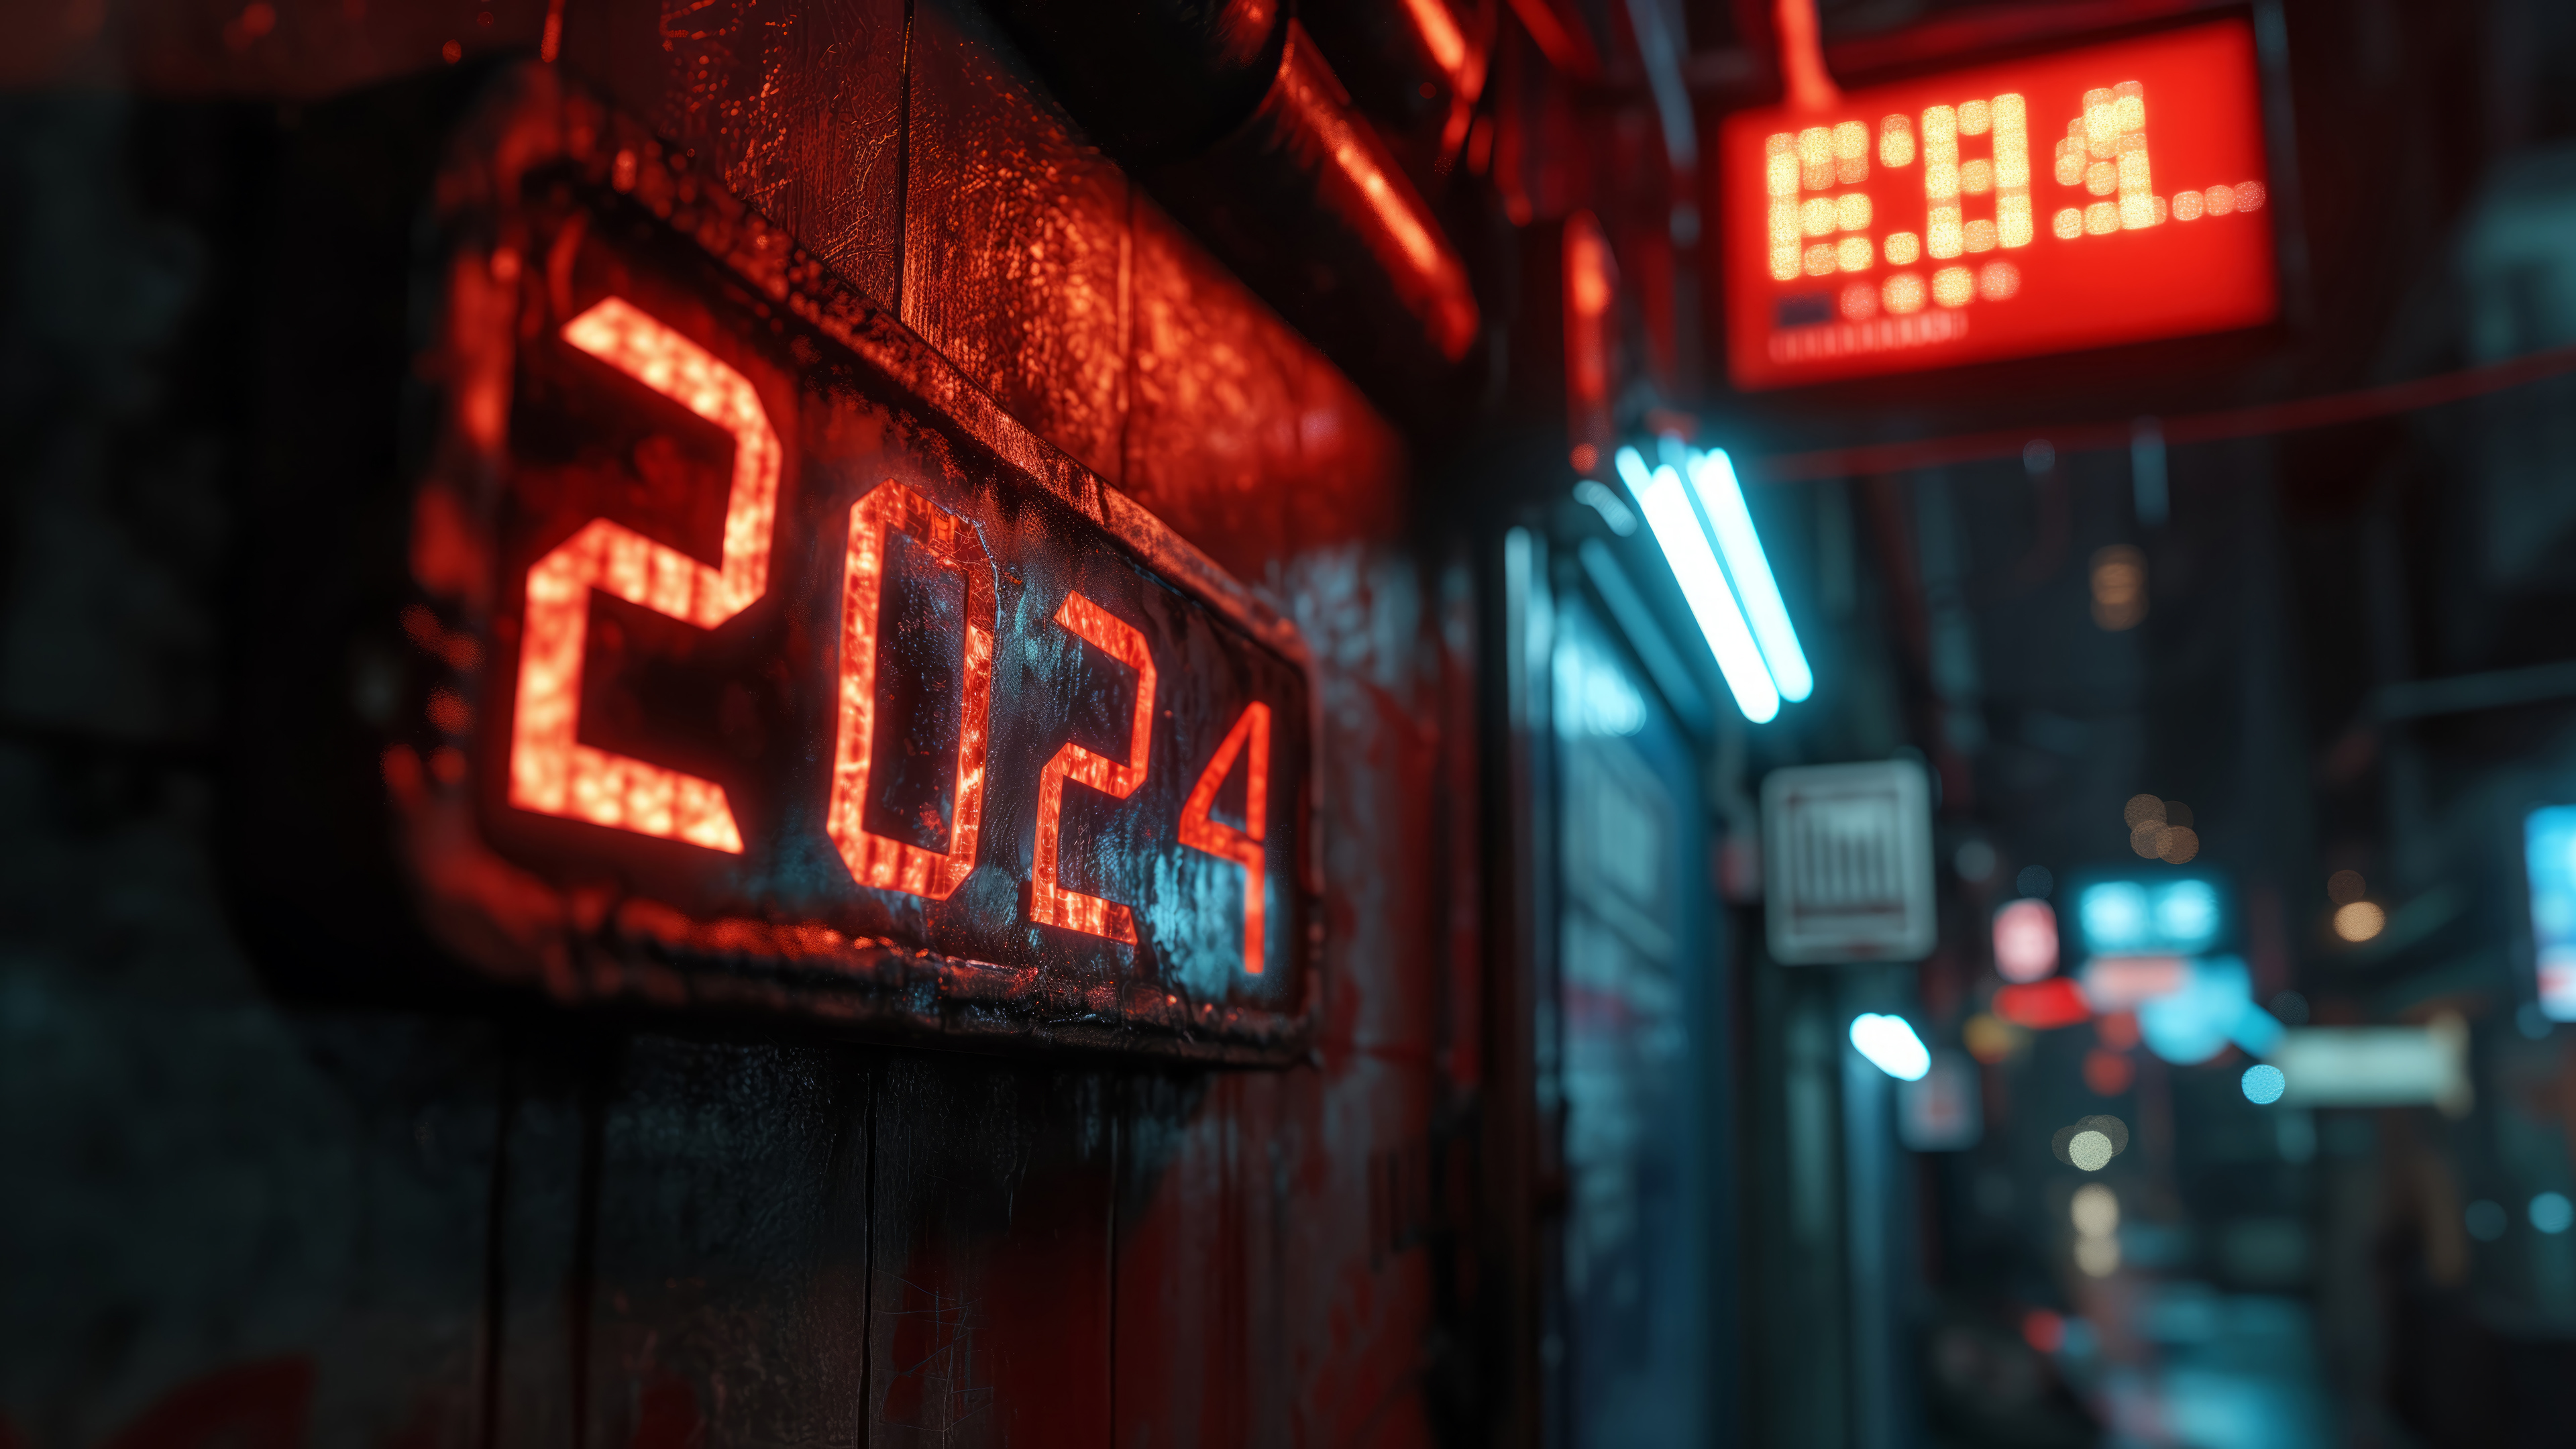 HD wallpaper of a neon sign displaying '2024' with a futuristic city vibe, perfect as a New Year 2024 desktop background.